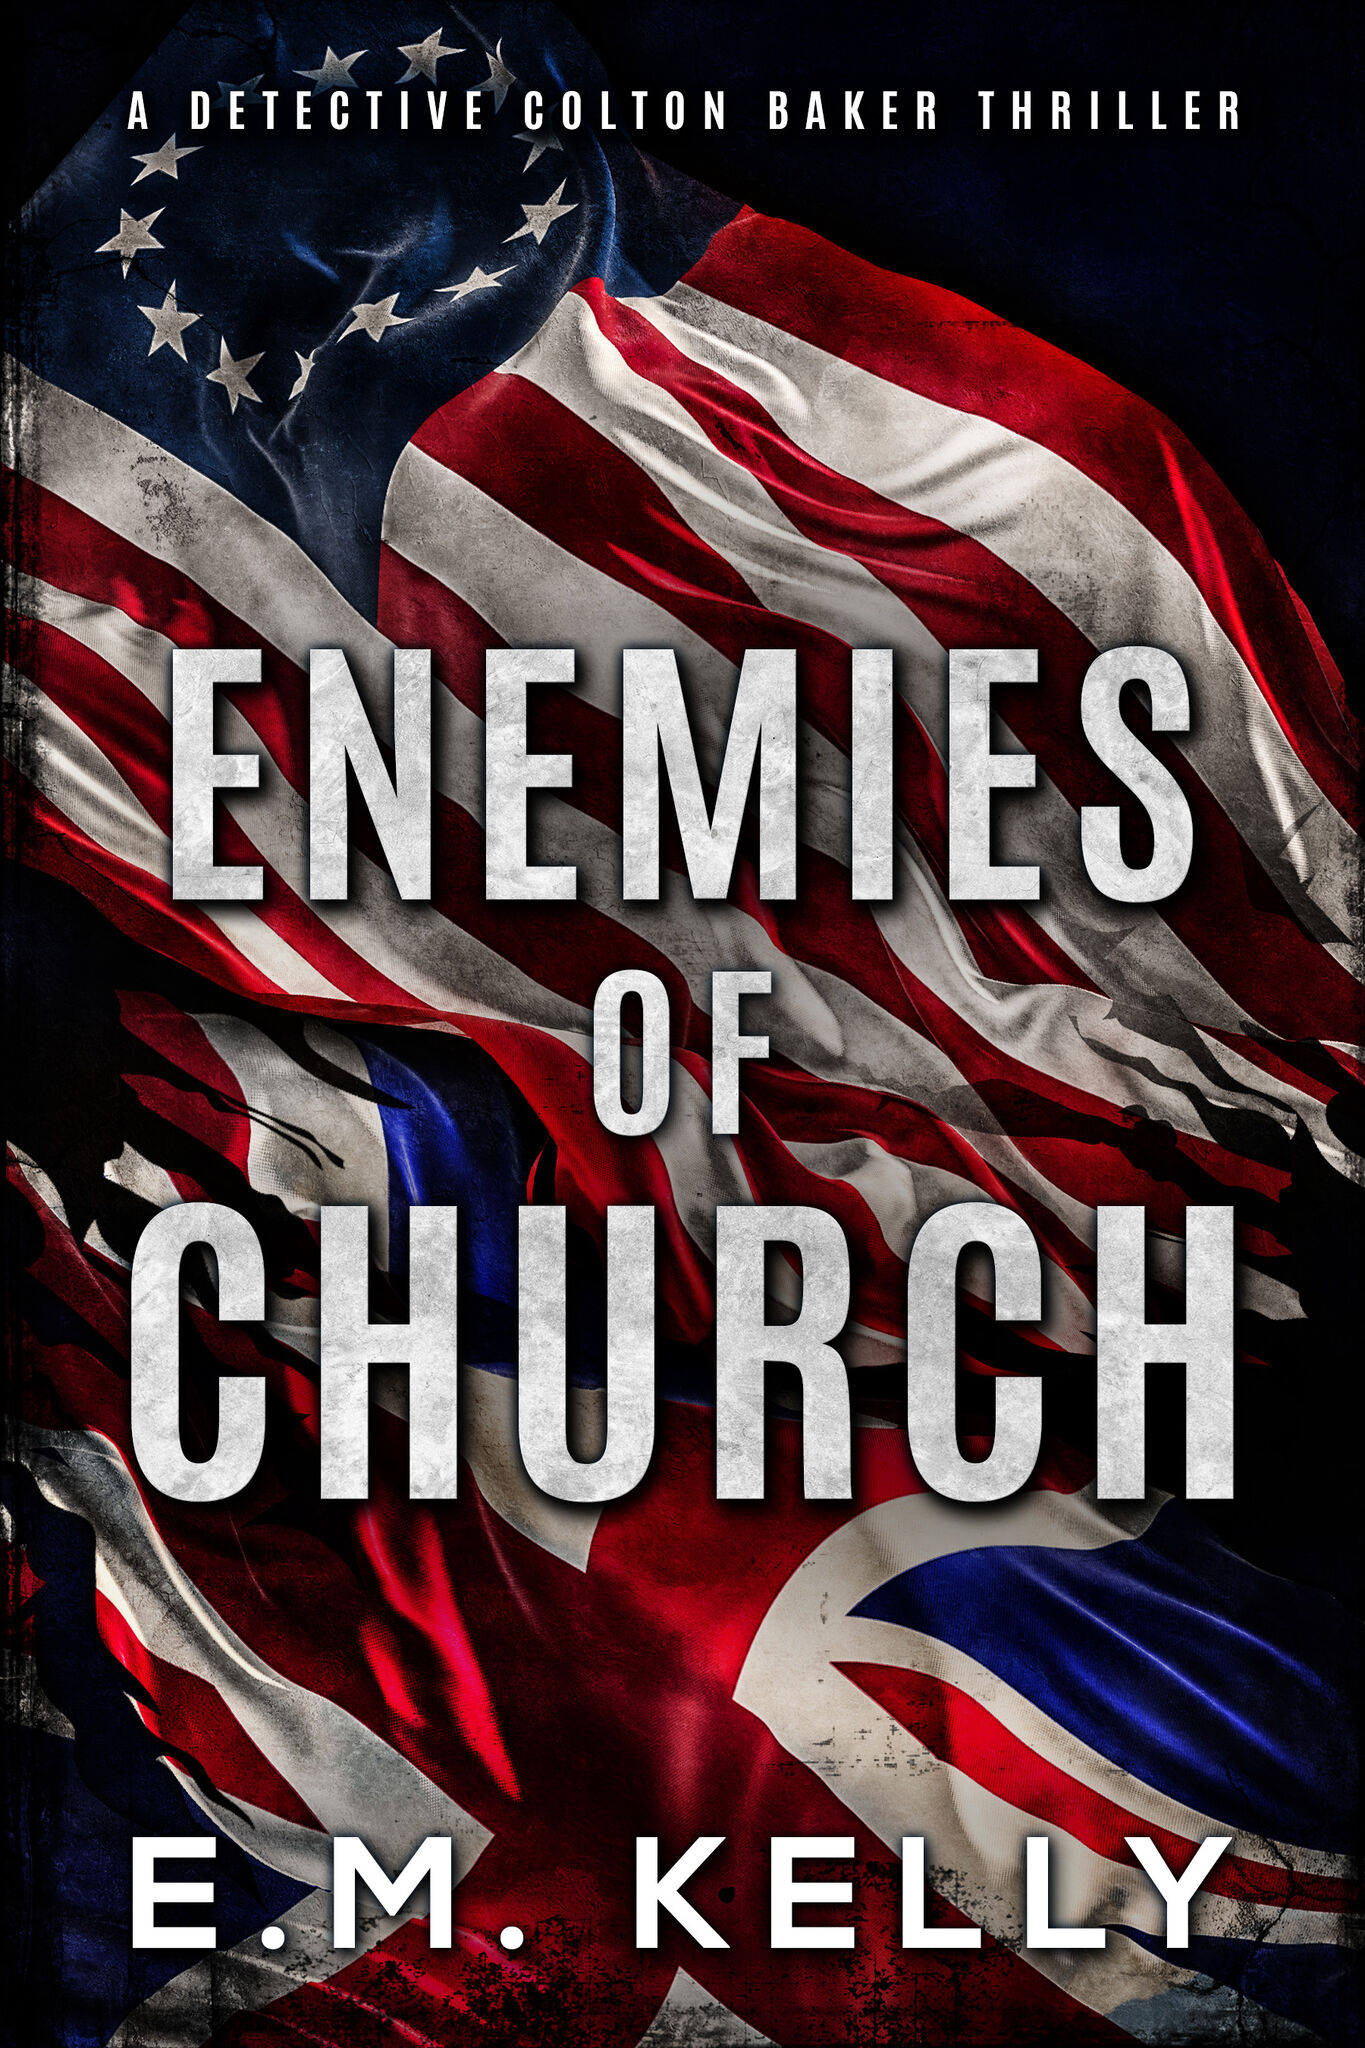 Enemies of Church: A Detective Colton Baker Thriller